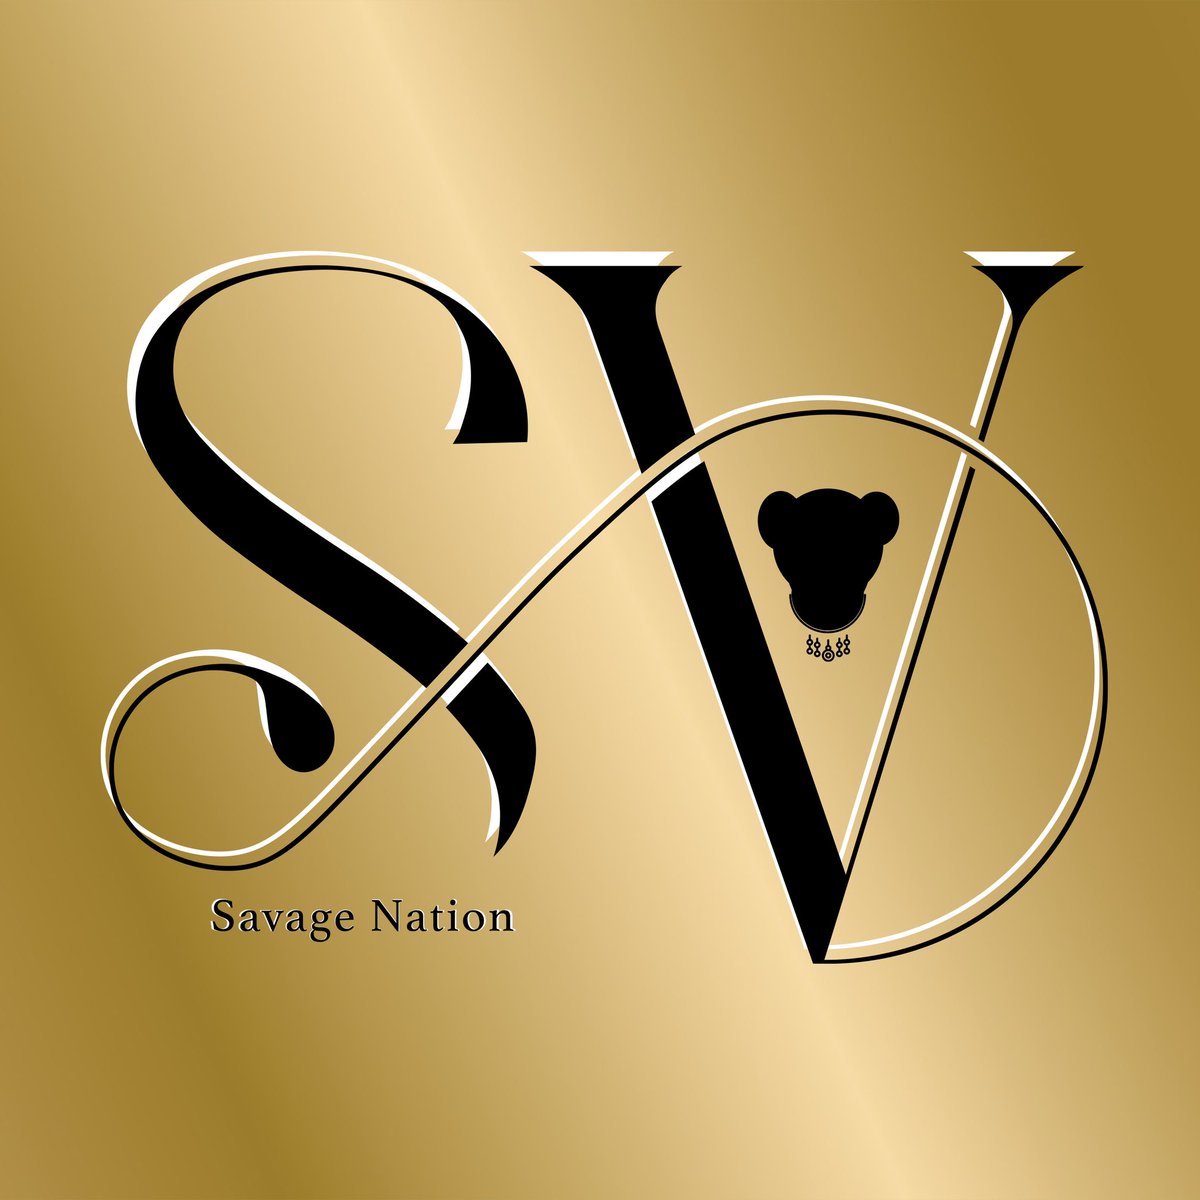 Hey fam, what’s your experience been like being a part of #SavageNation ??